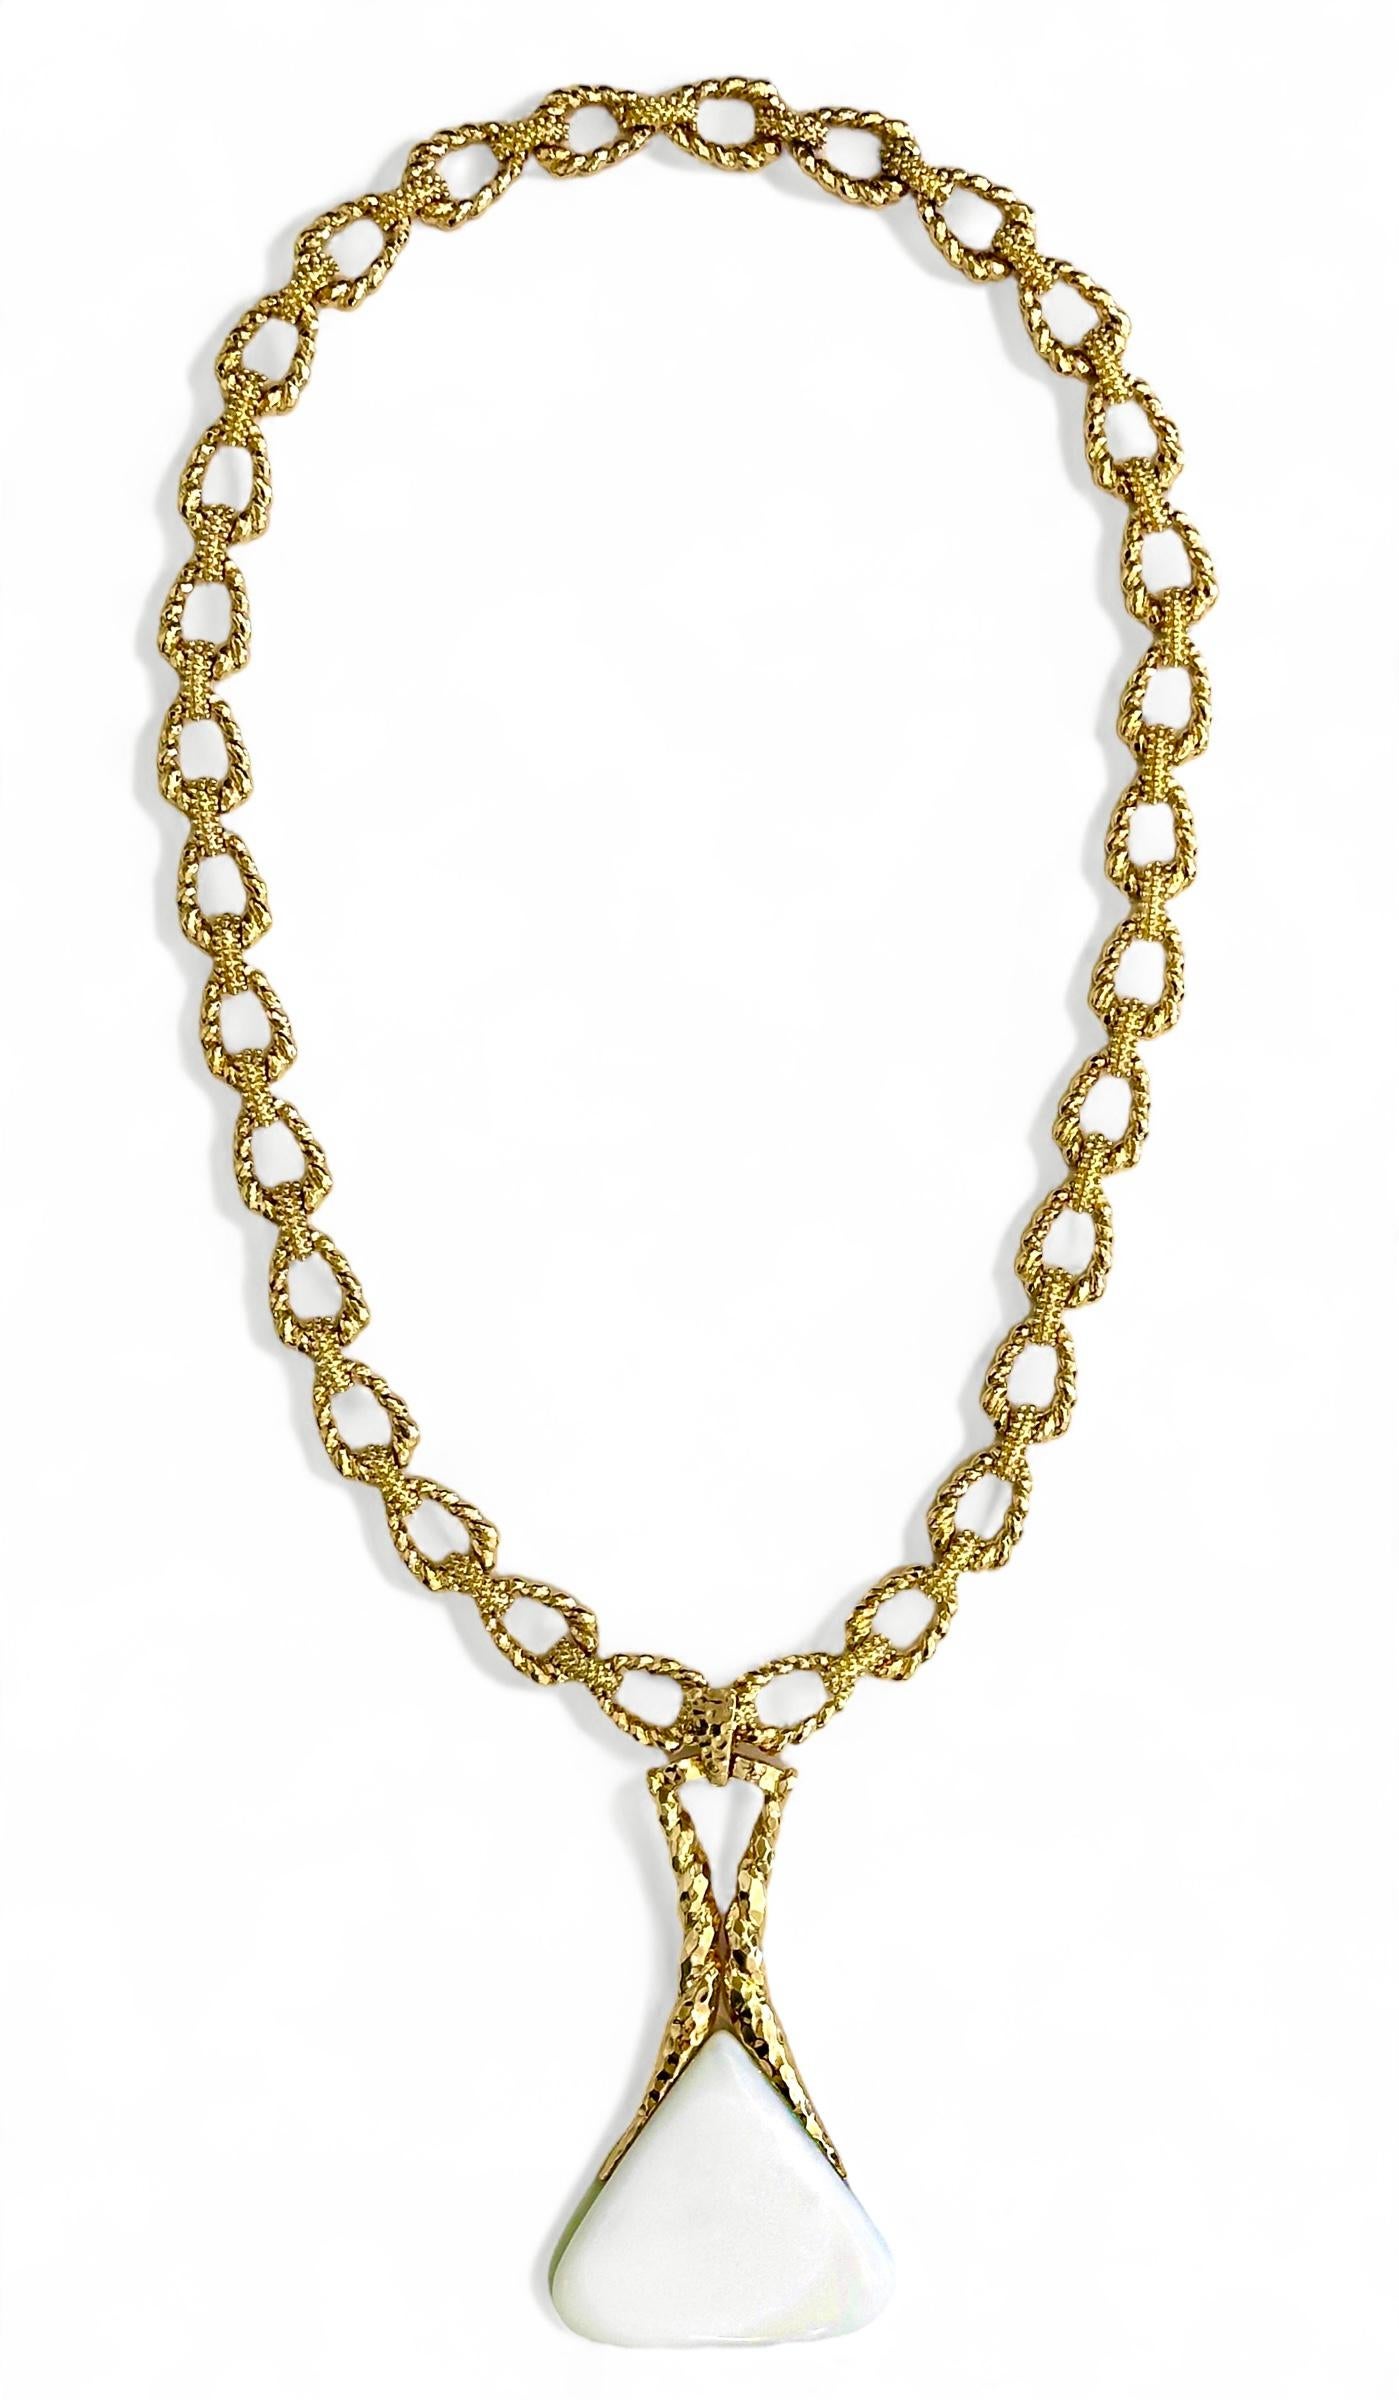 This classic 18k yellow gold long, open link necklace by French designer, Wander, with removable 14k yellow gold and white onyx pendant, personify pure French Mid-20th Century dramatic style and 